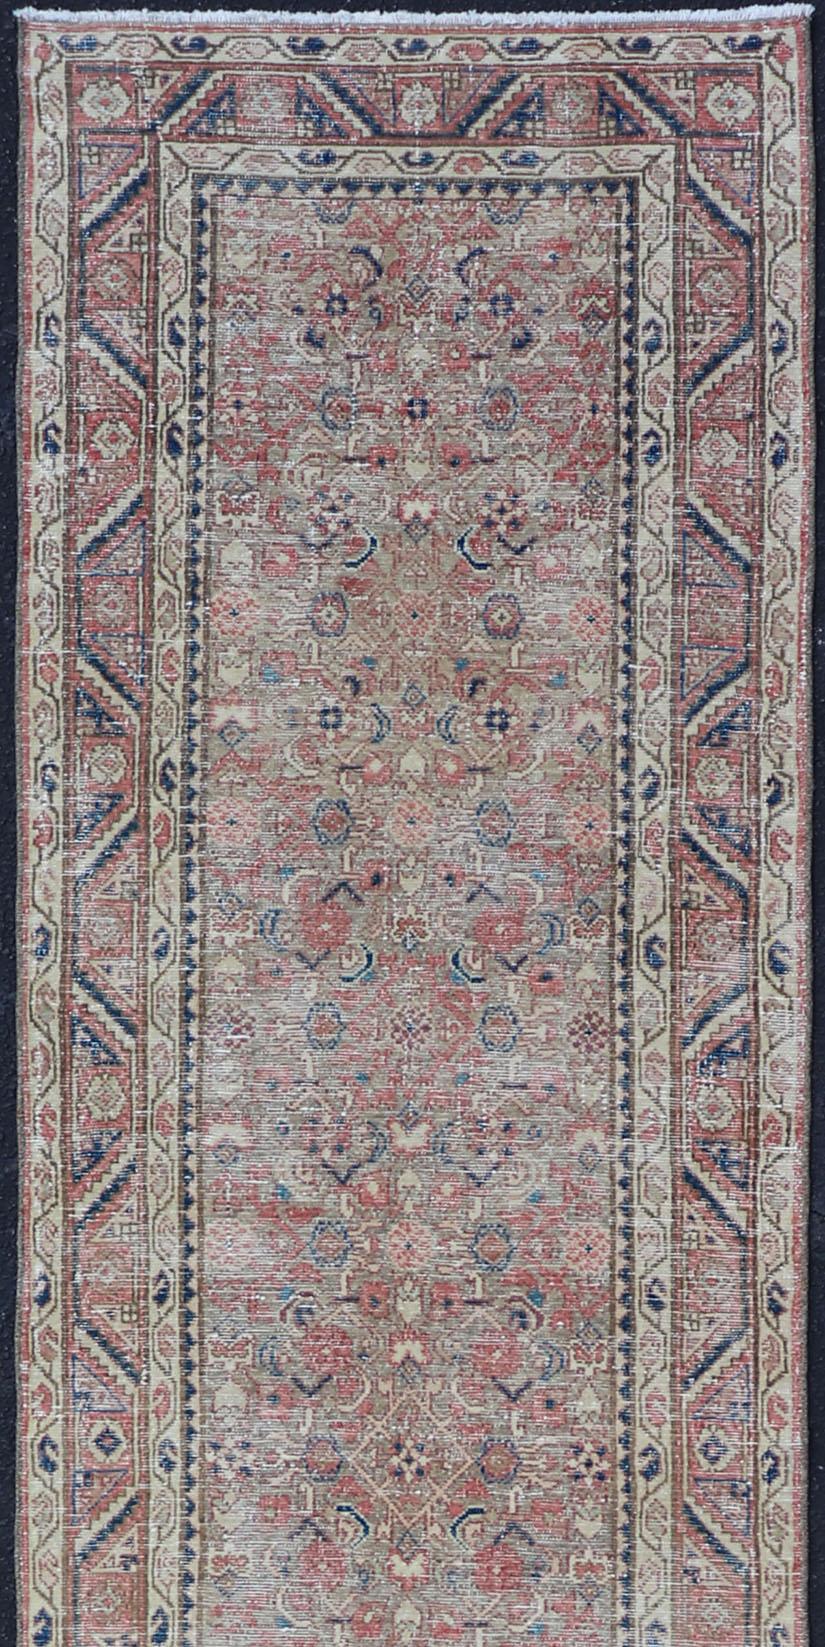 Antique Persian Malayer Runner in Tones of Blue, Salmon, Cream, and Tans For Sale 4